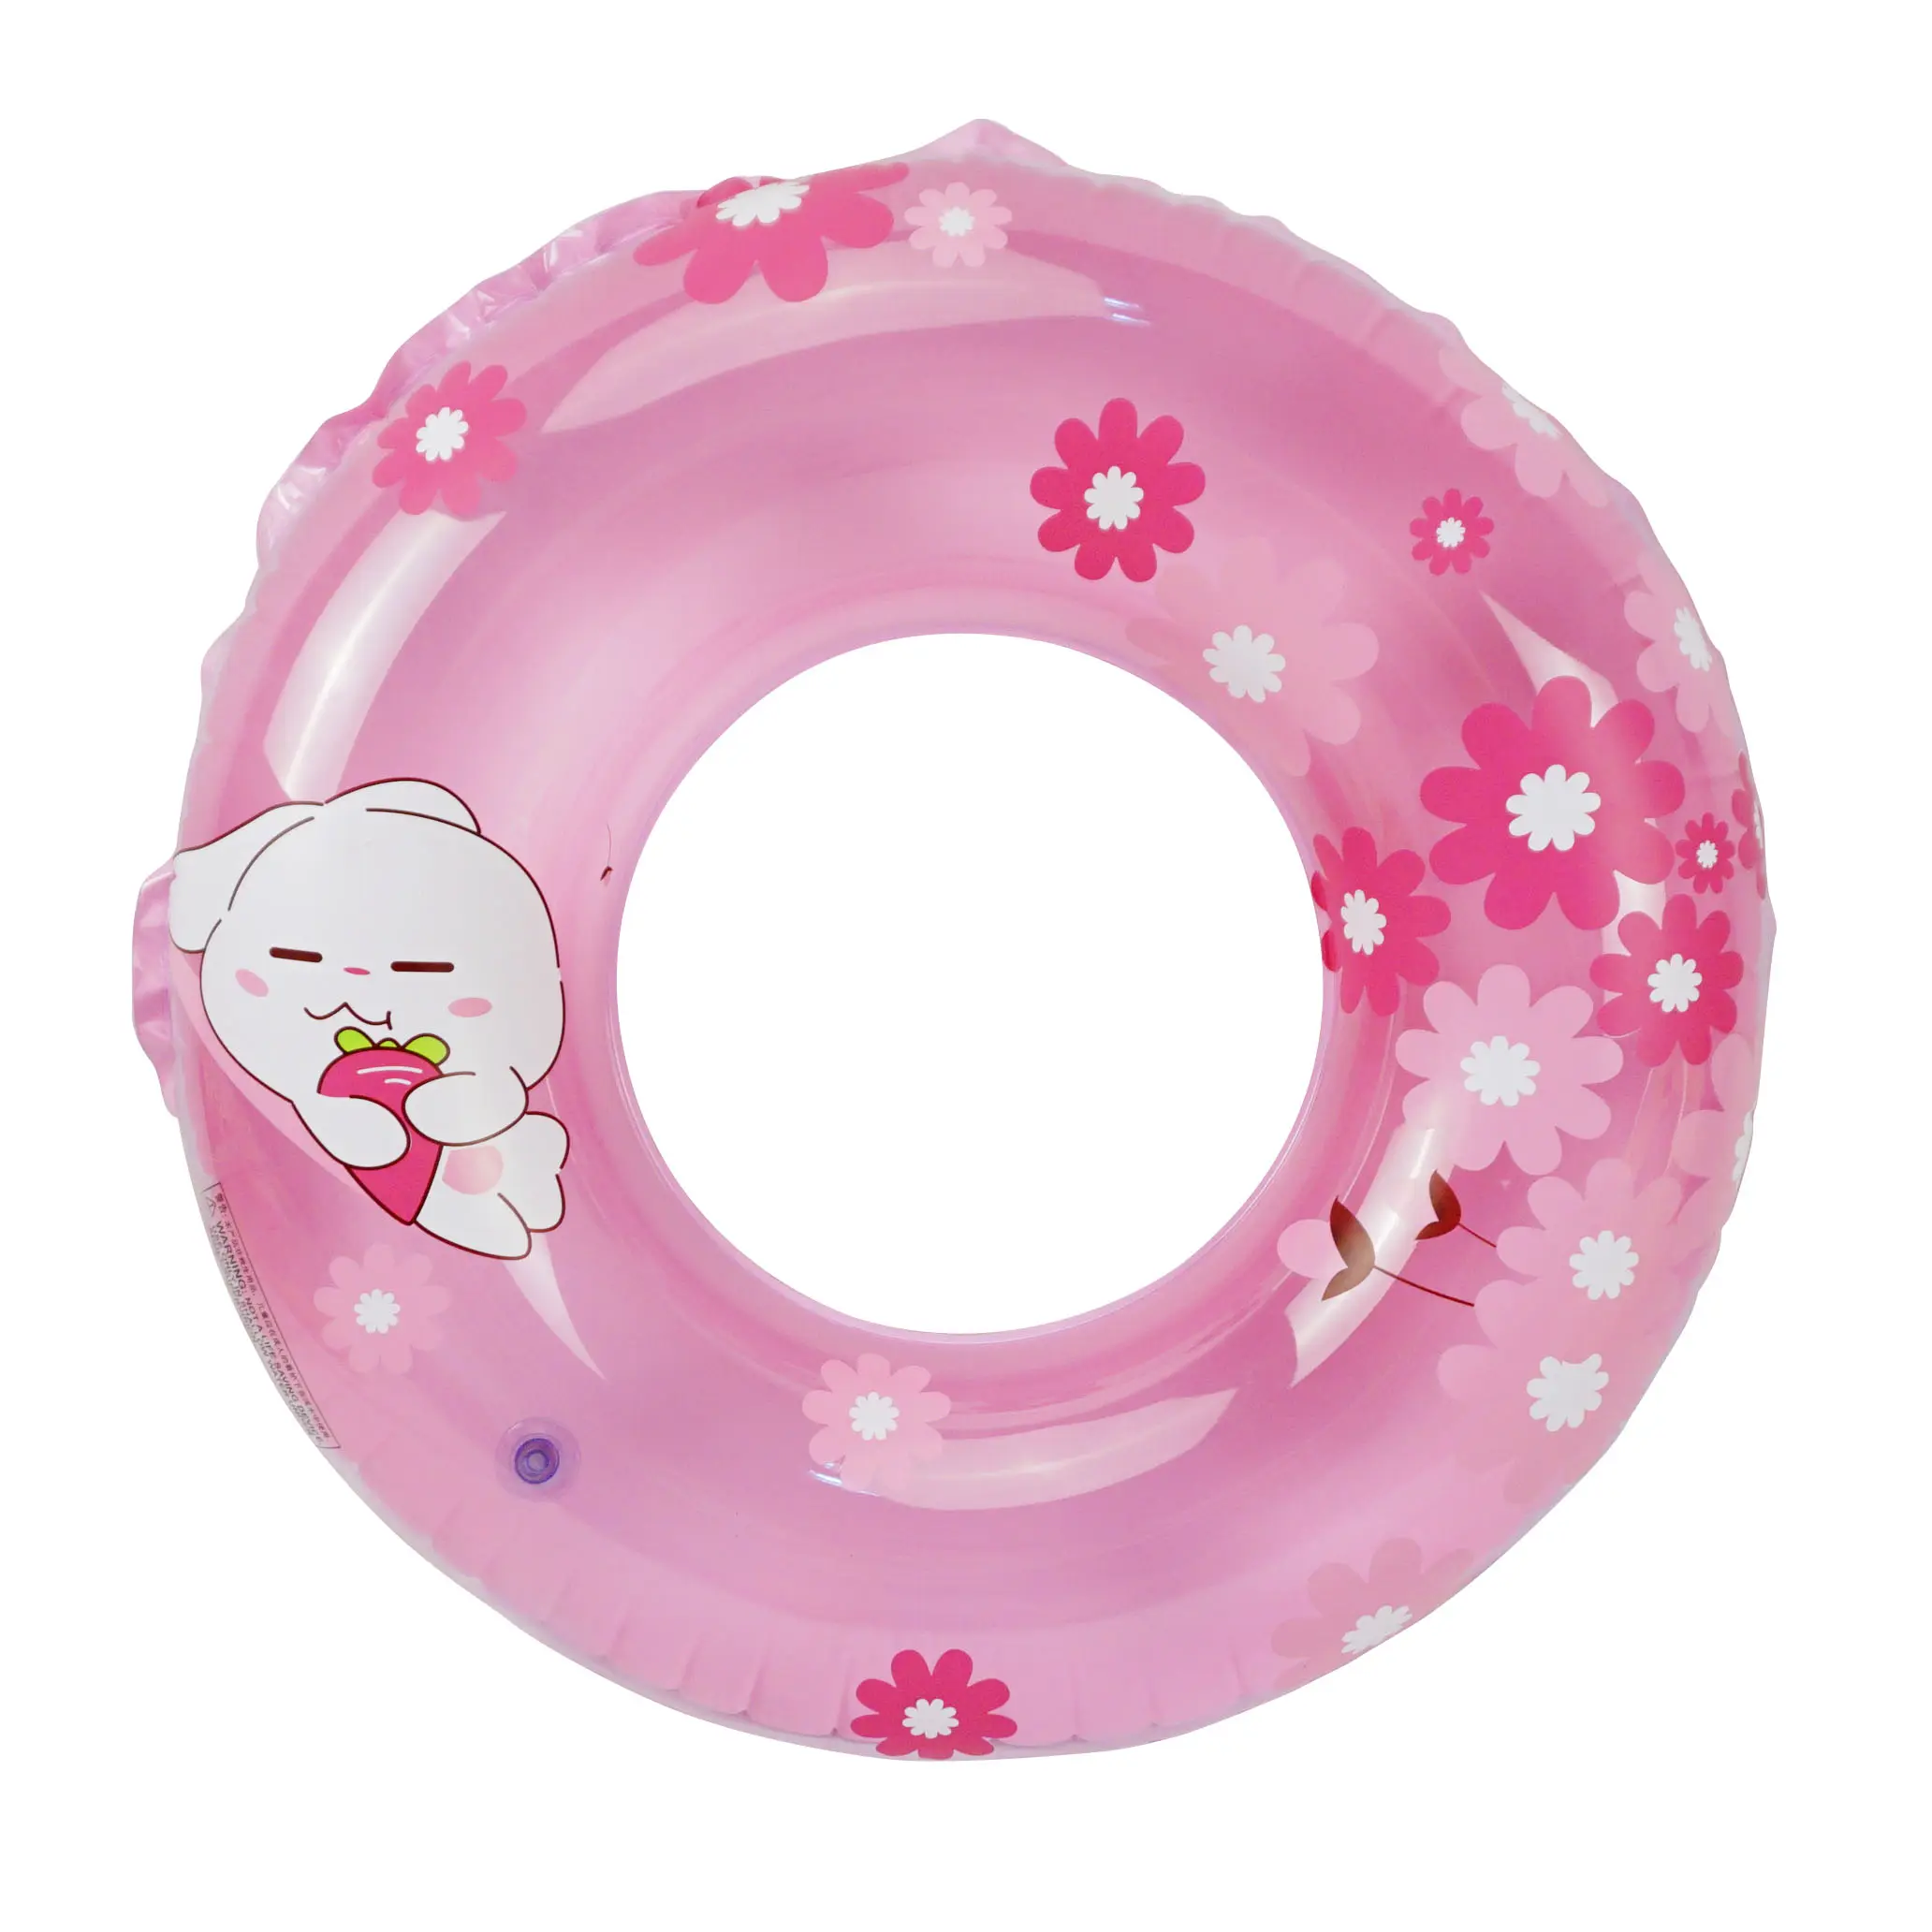 Customize swimming tube circle ring Cute rabbit swimming float Inflatable ring for pool party